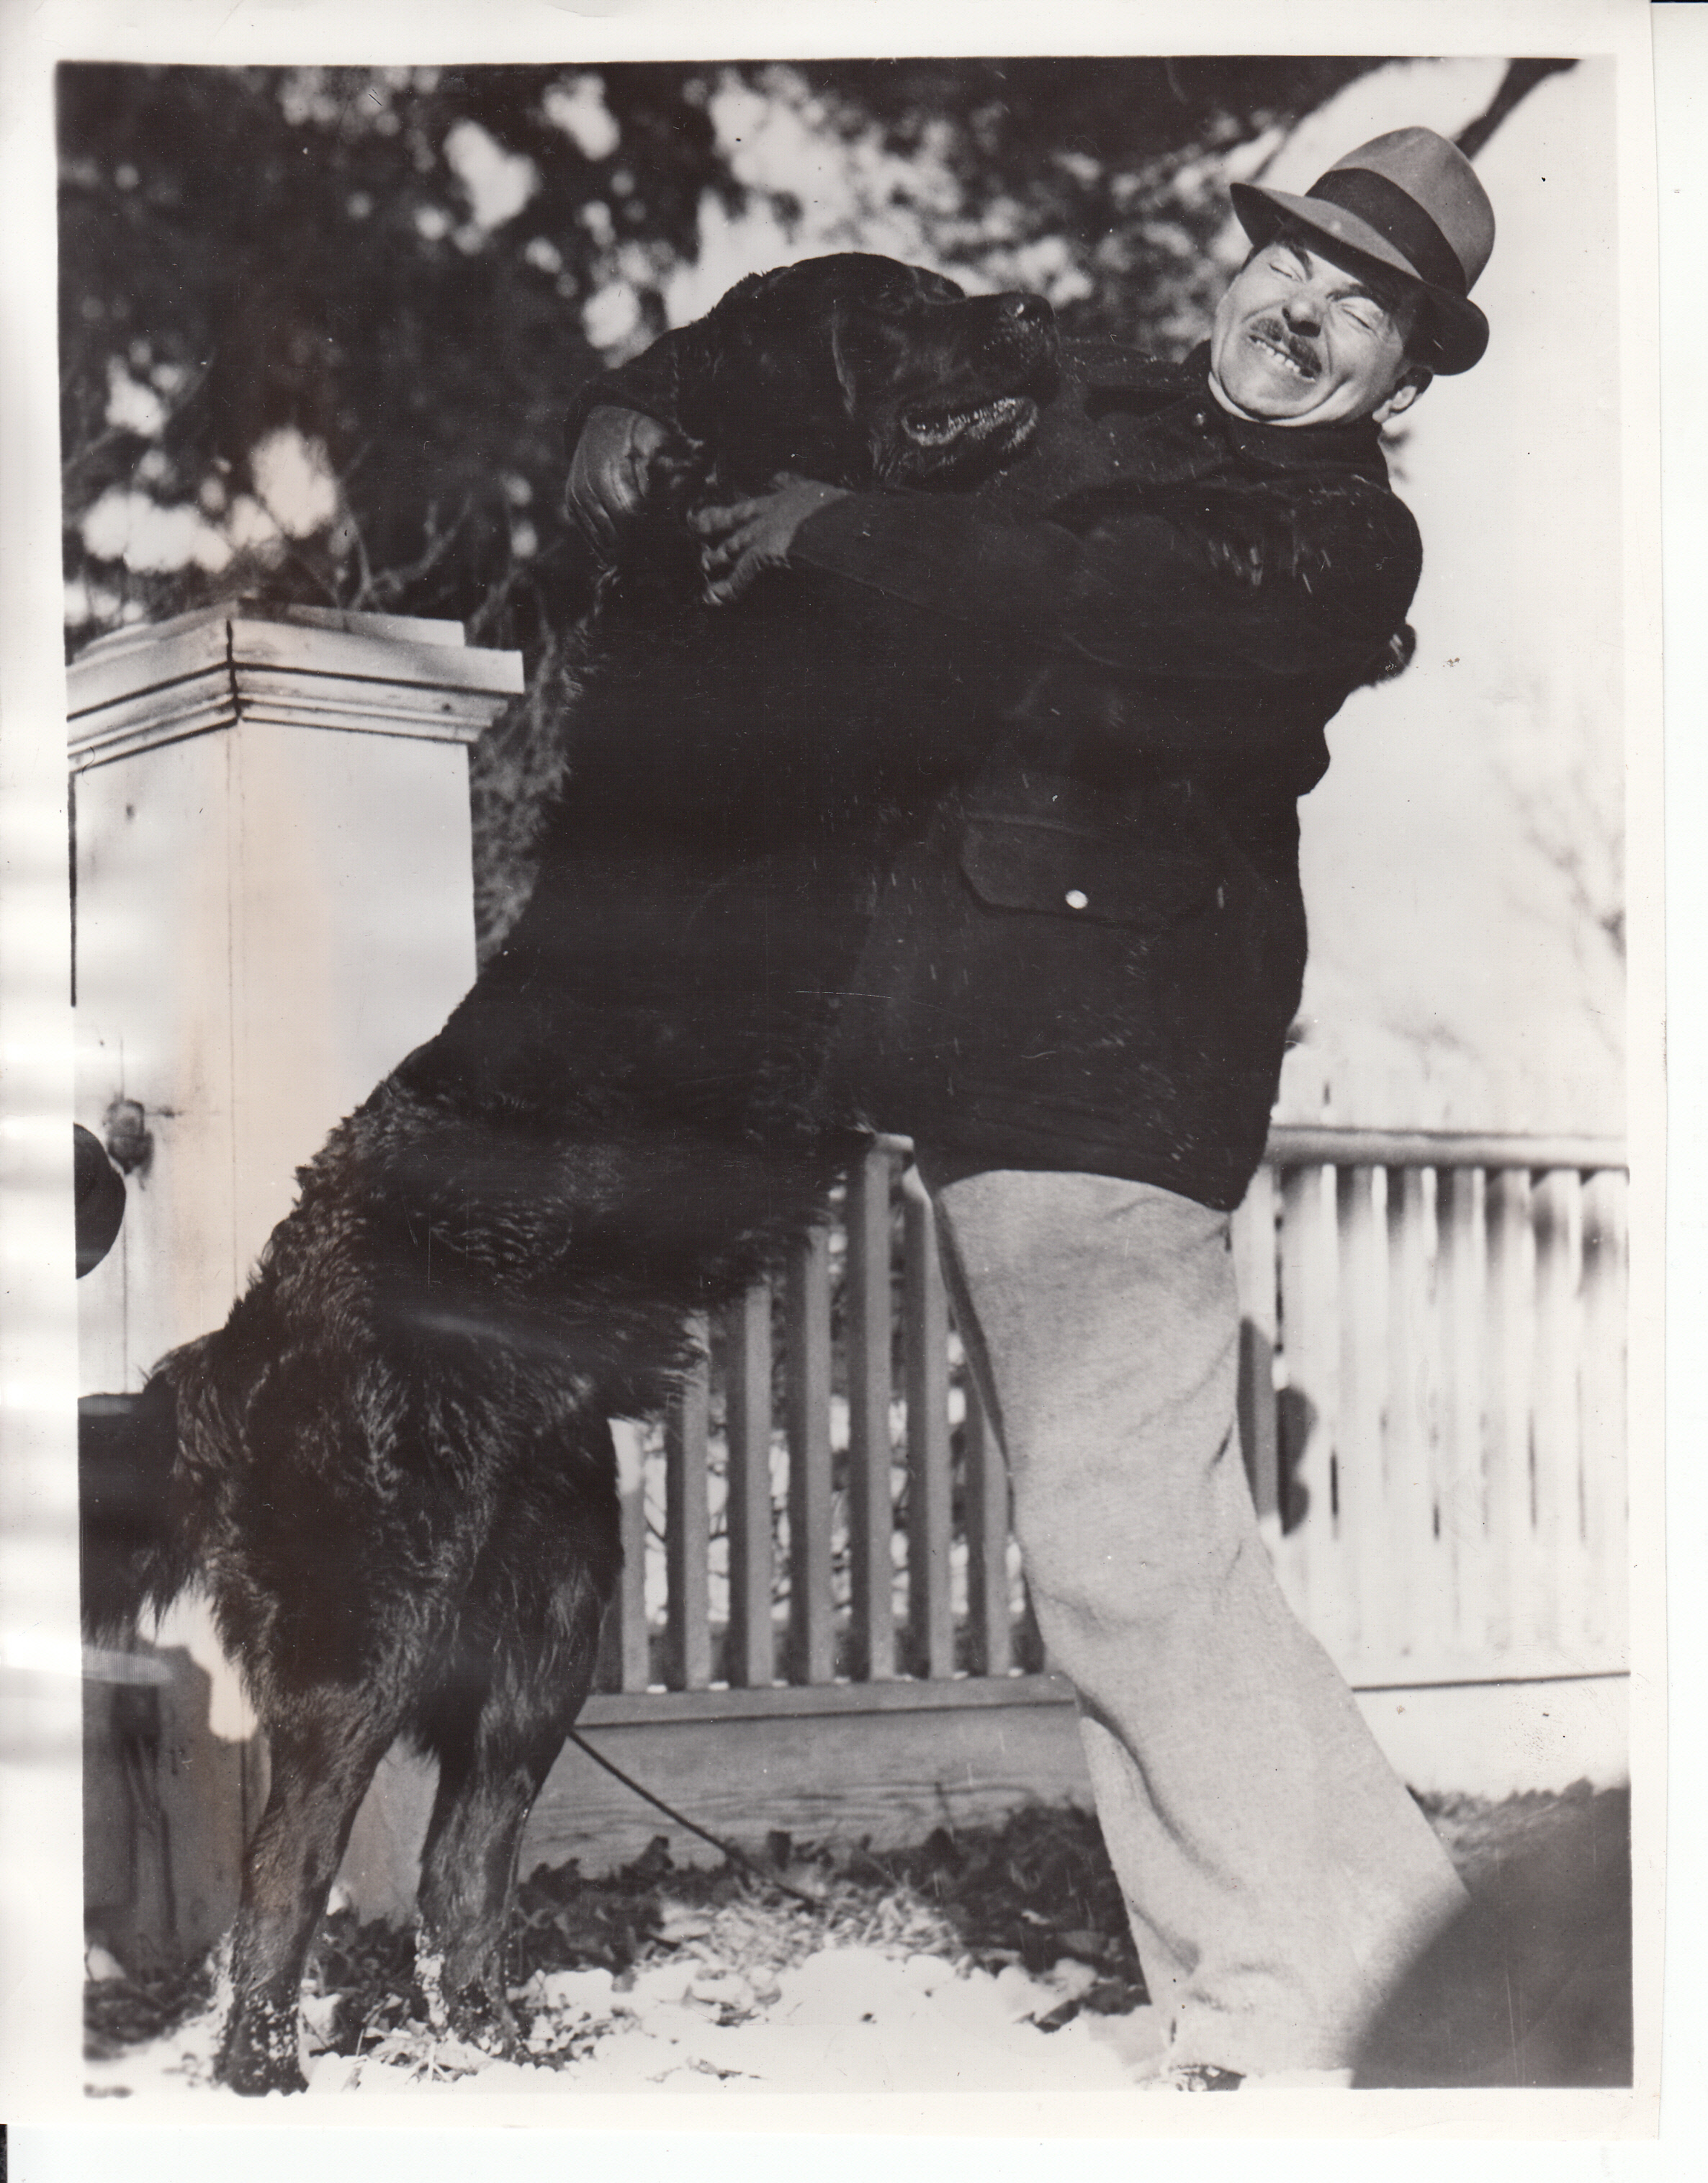 Dewey with his dog Bounty in Pawling, NY.  Jan. 9, 1940